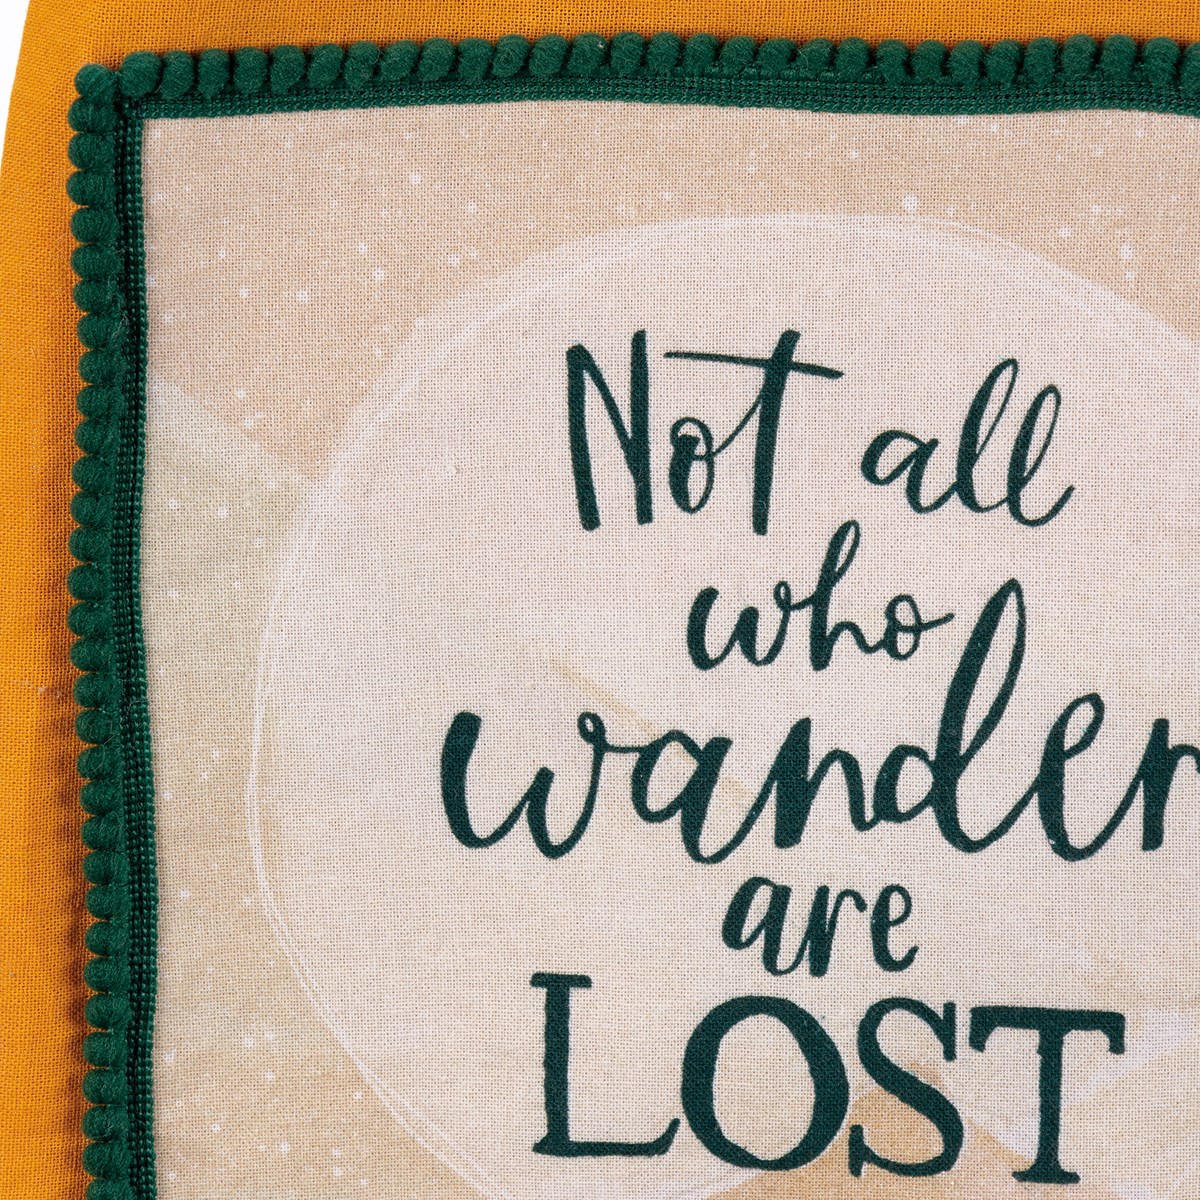 Kitchen Towel - Not All Who Wander Are Lost - 28" x 28" - Cotton